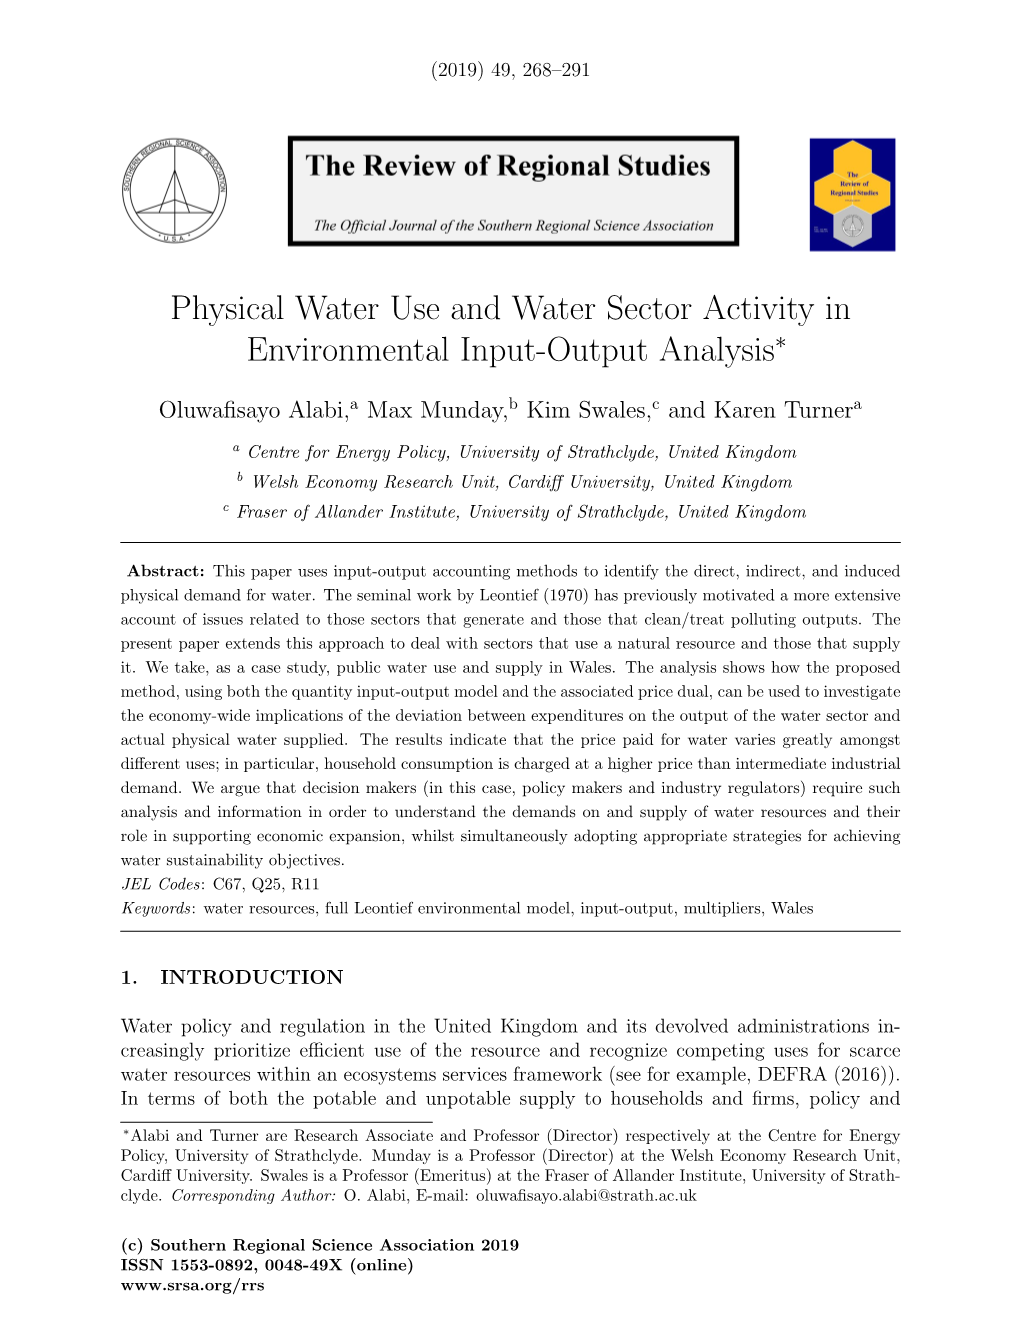 Physical Water Use and Water Sector Activity in Environmental Input-Output Analysis∗